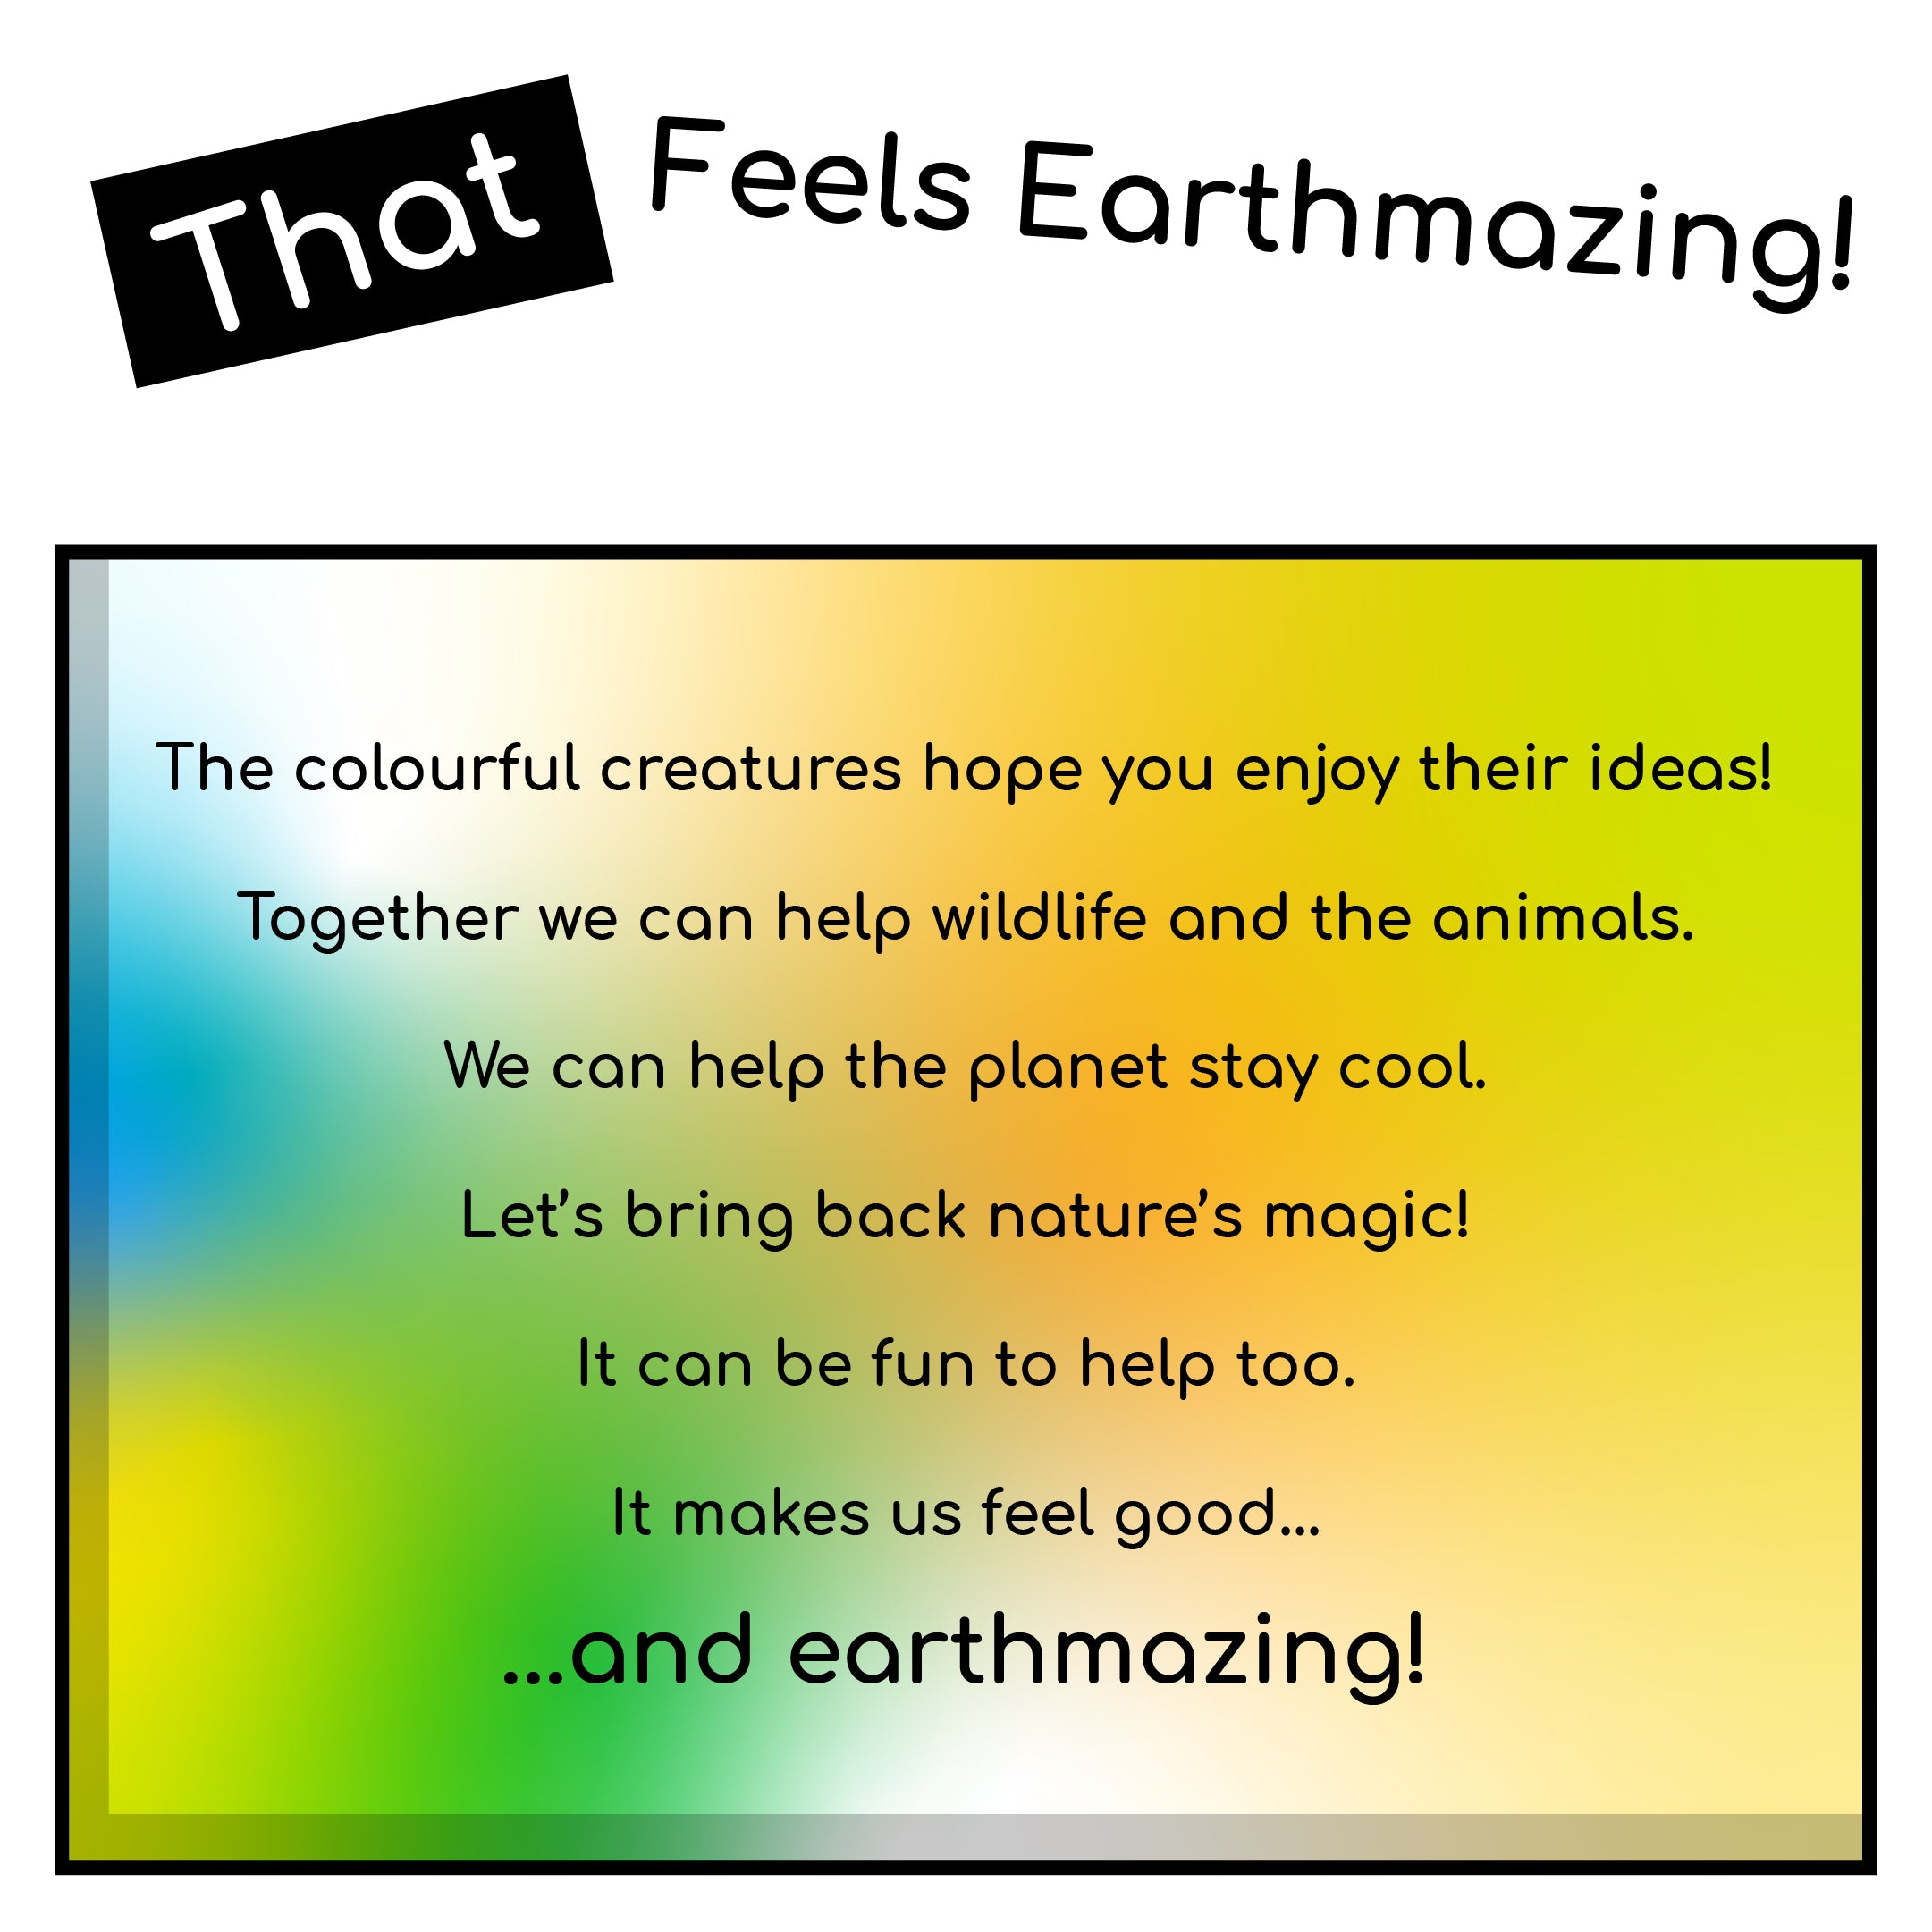 That Feels Earthmazing Children's Climate Change Empowerment Book Hardcover UK Version - Premium Colour